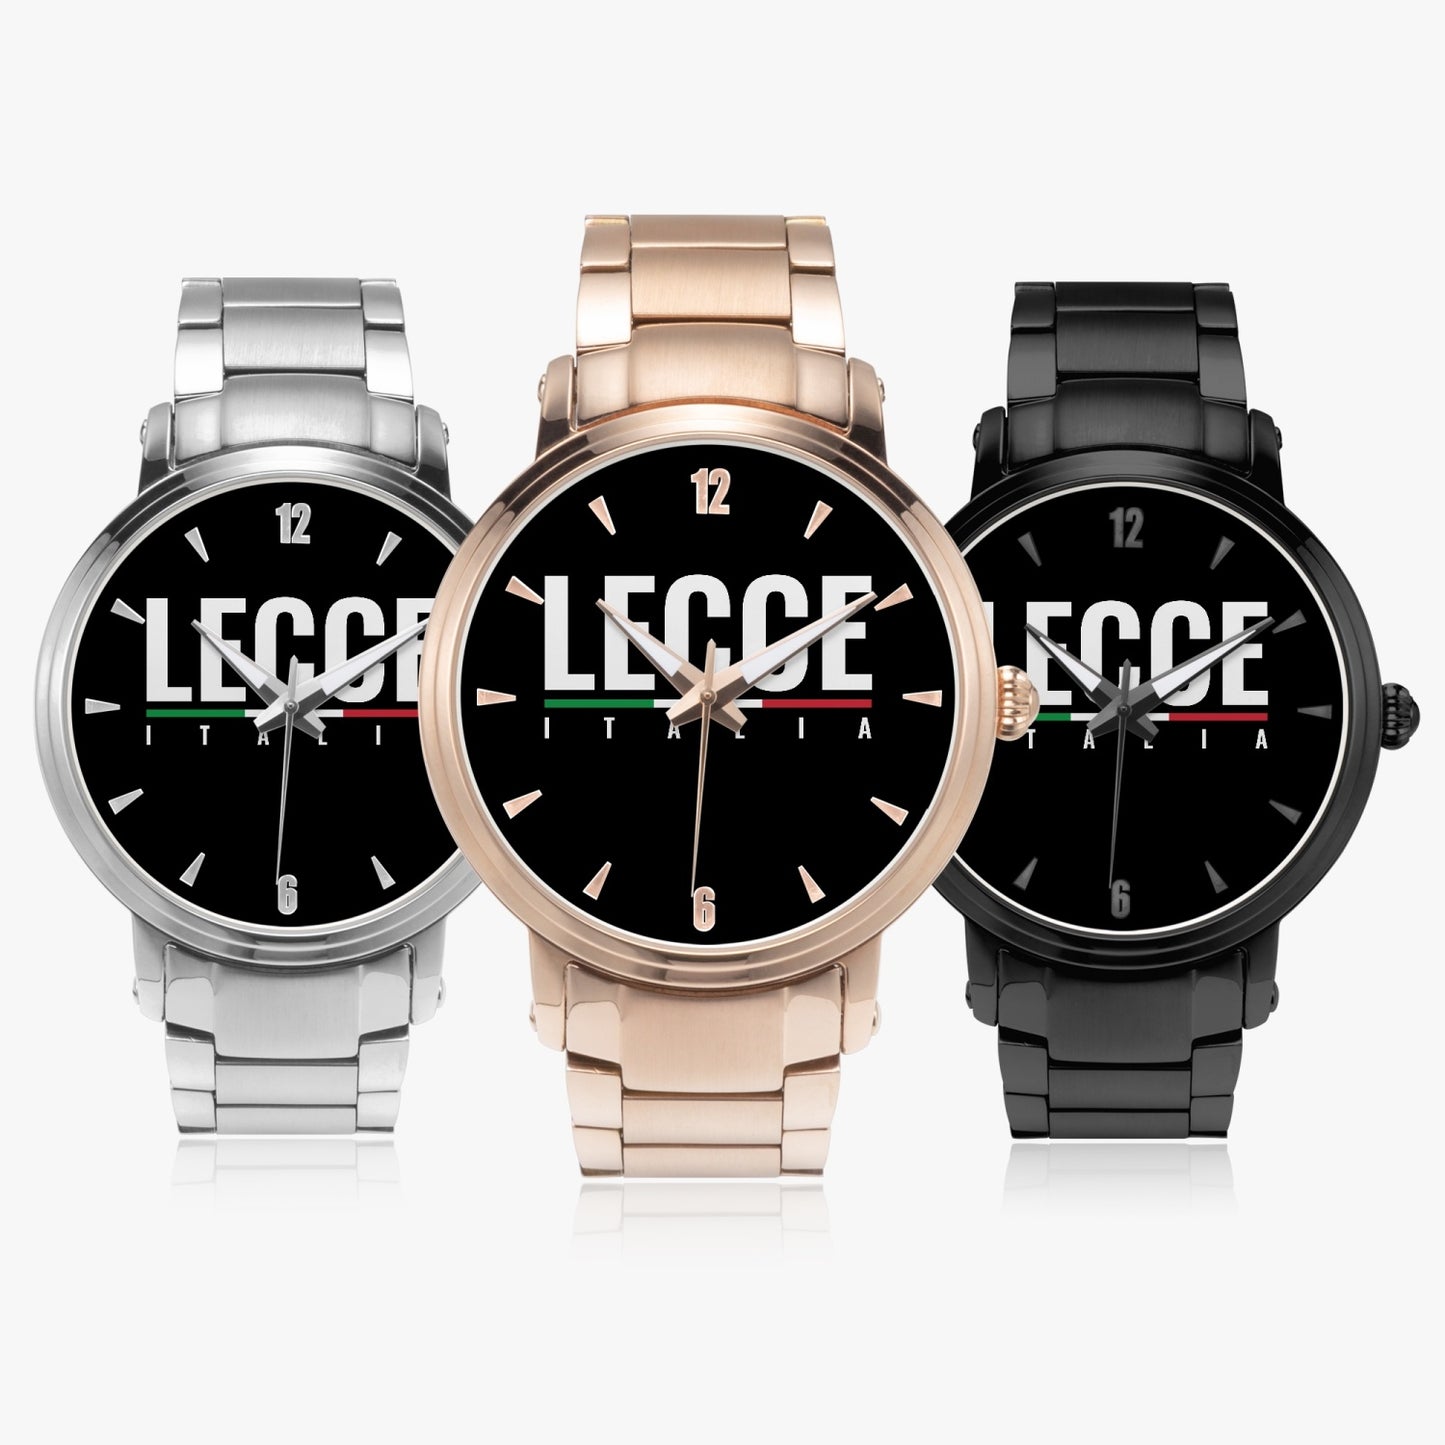 Lecce Italia Automatic Movement Watch - Premium Stainless Steel